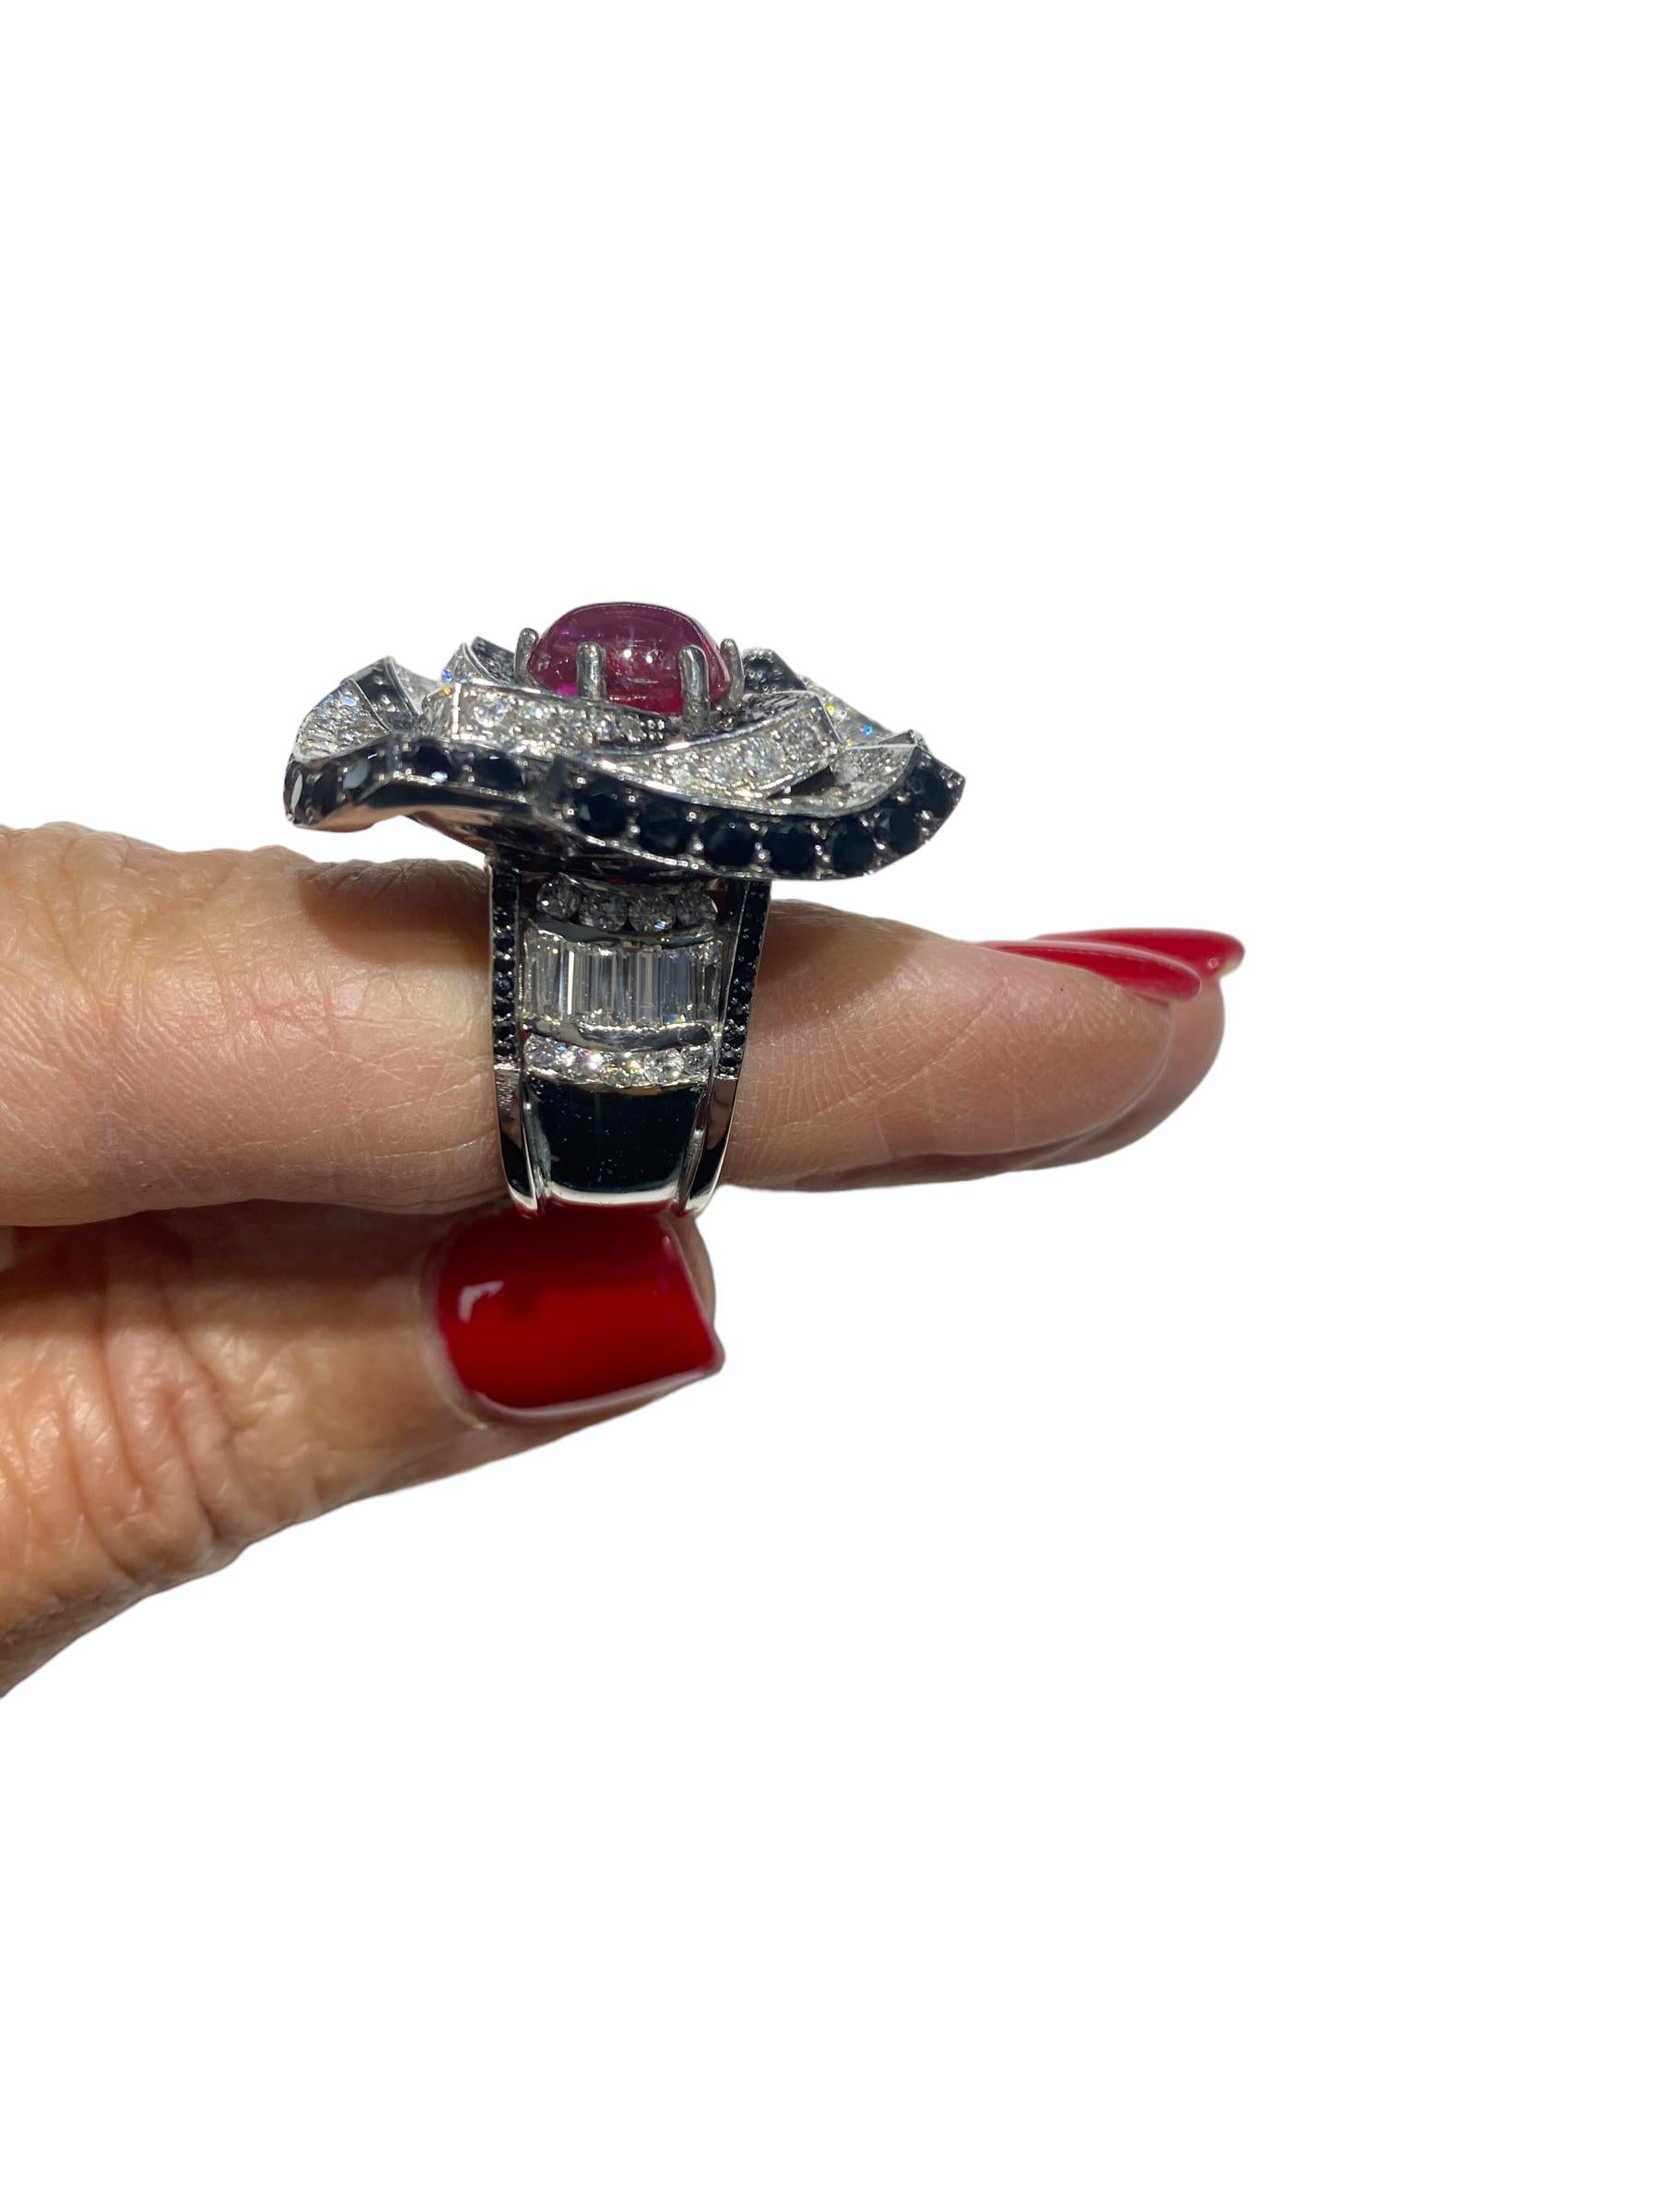 18 Karat Ruby & Diamond Large Flower Ring with Black Spinel 9 Carats For Sale 4